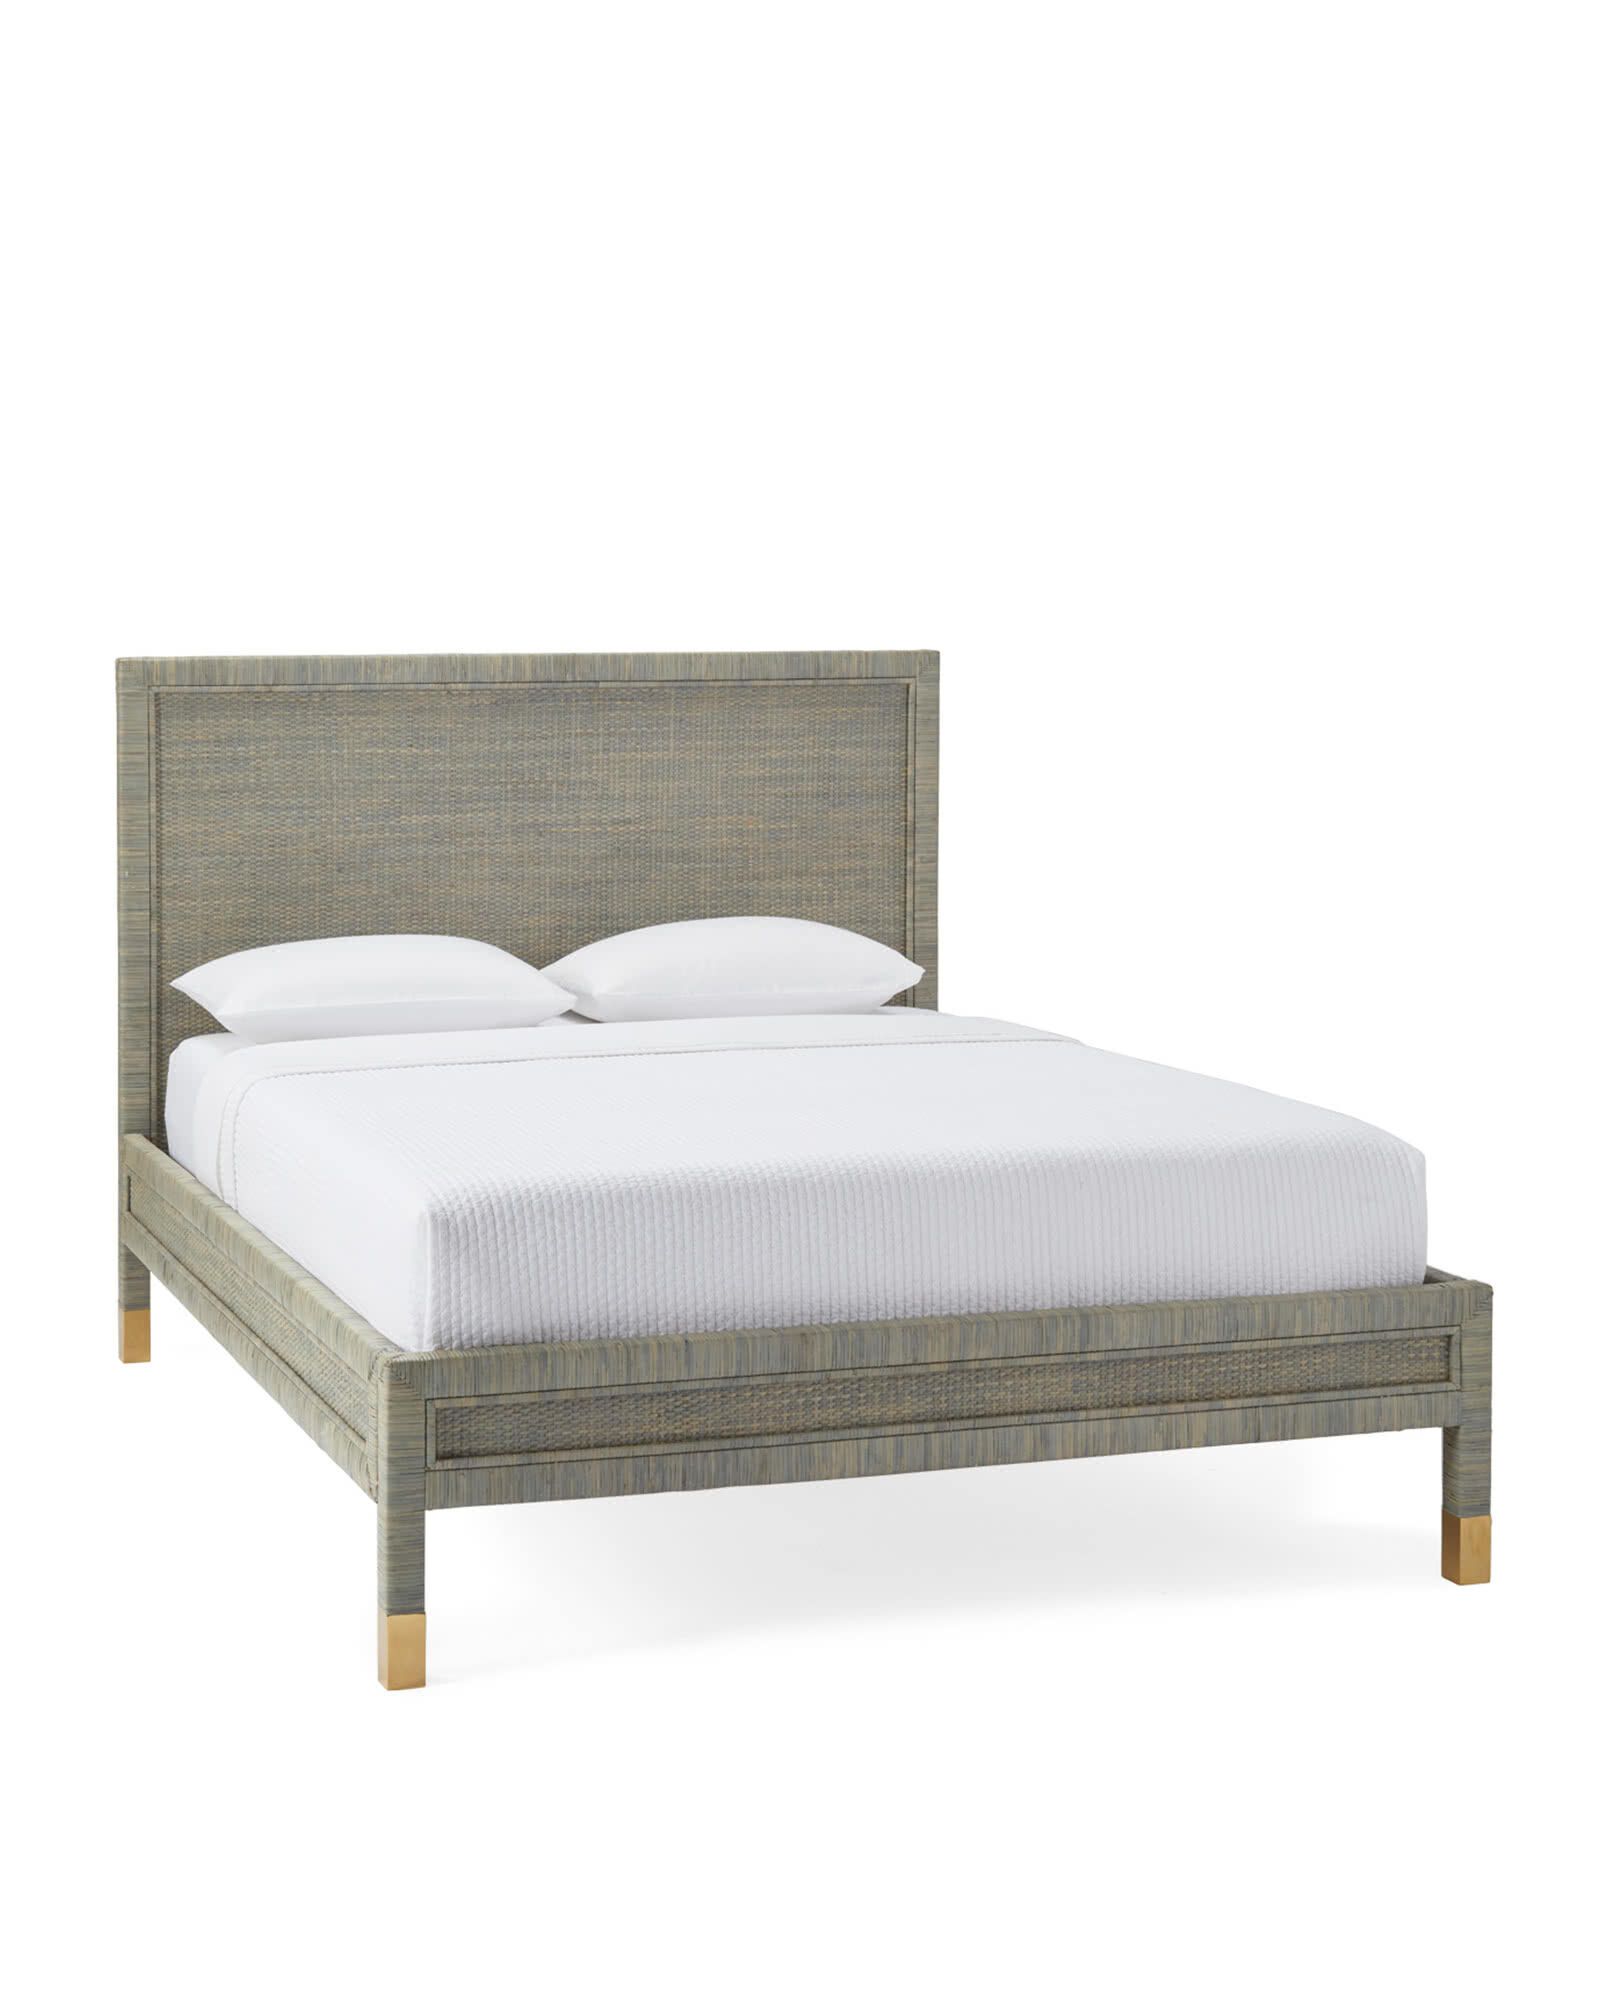 Balboa Bed - Mist | Serena and Lily